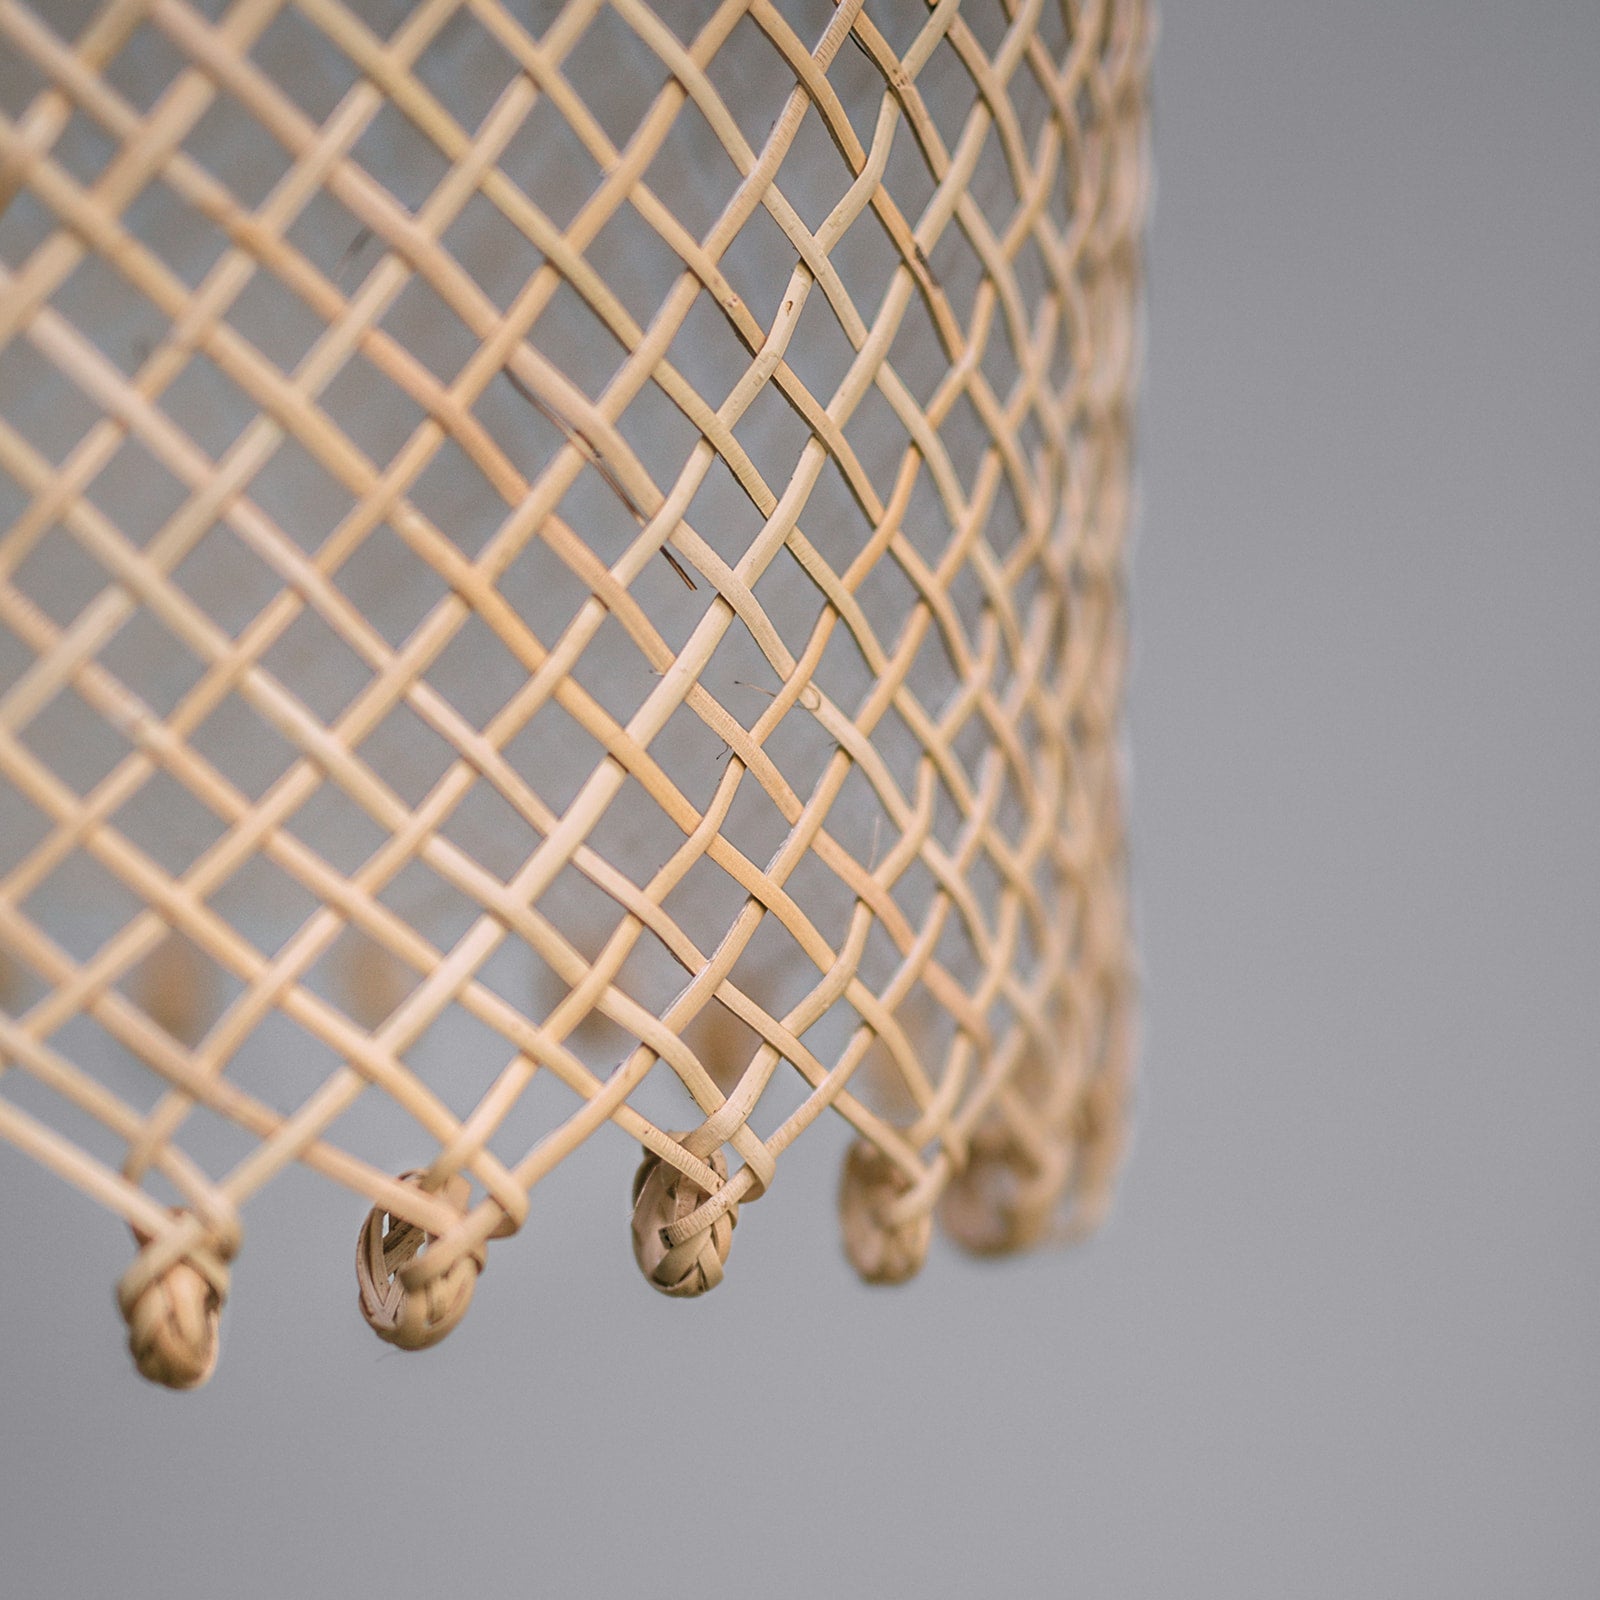 Natural-coastal-style-lighting-photo-showing-detail-of-a-borneo-basket-light-shade-with-open-weave-and-ring-detail-at-the-bottom